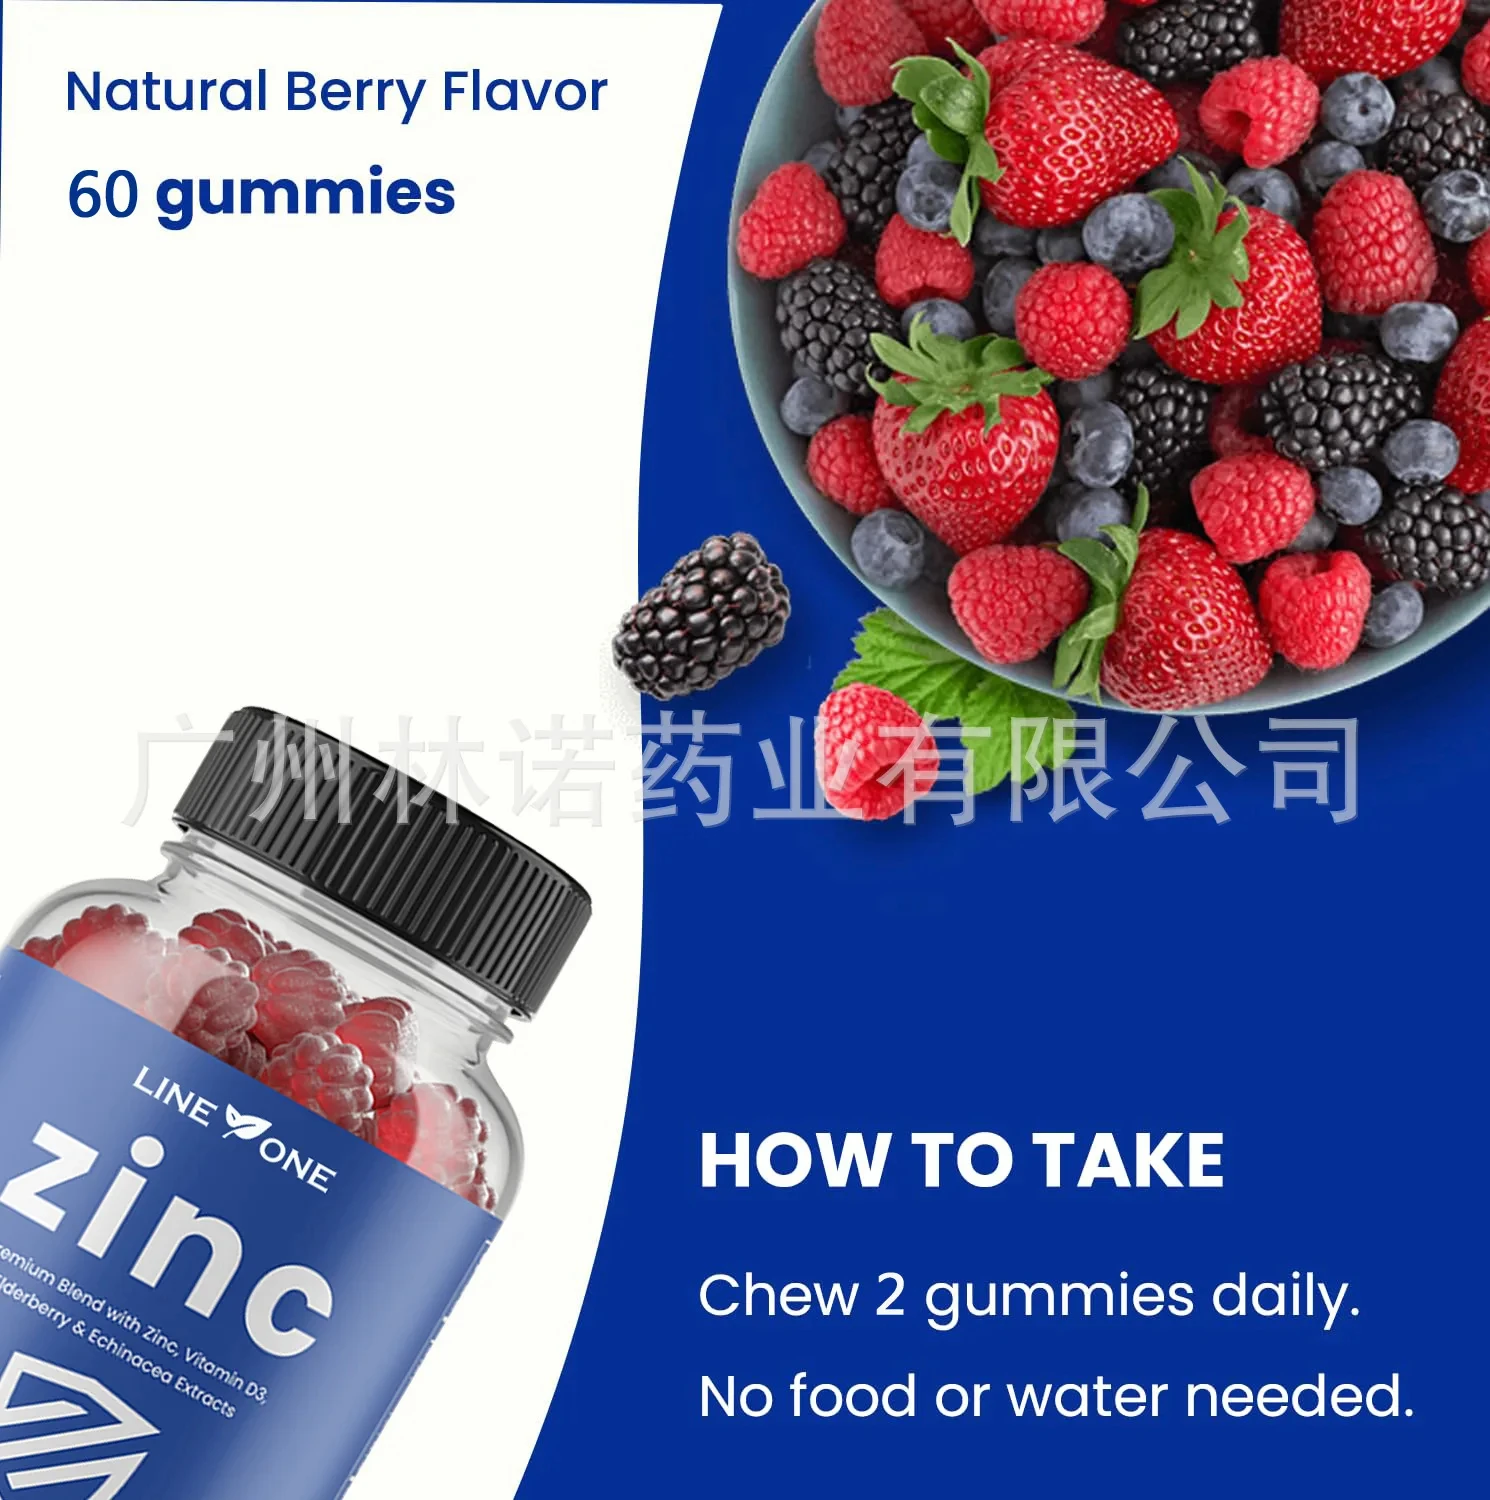 

Zinc 4 in 1 50mg | Berry flavoring -60% chewing gum, supports immunity, maintains metabolism, and has antioxidant properties